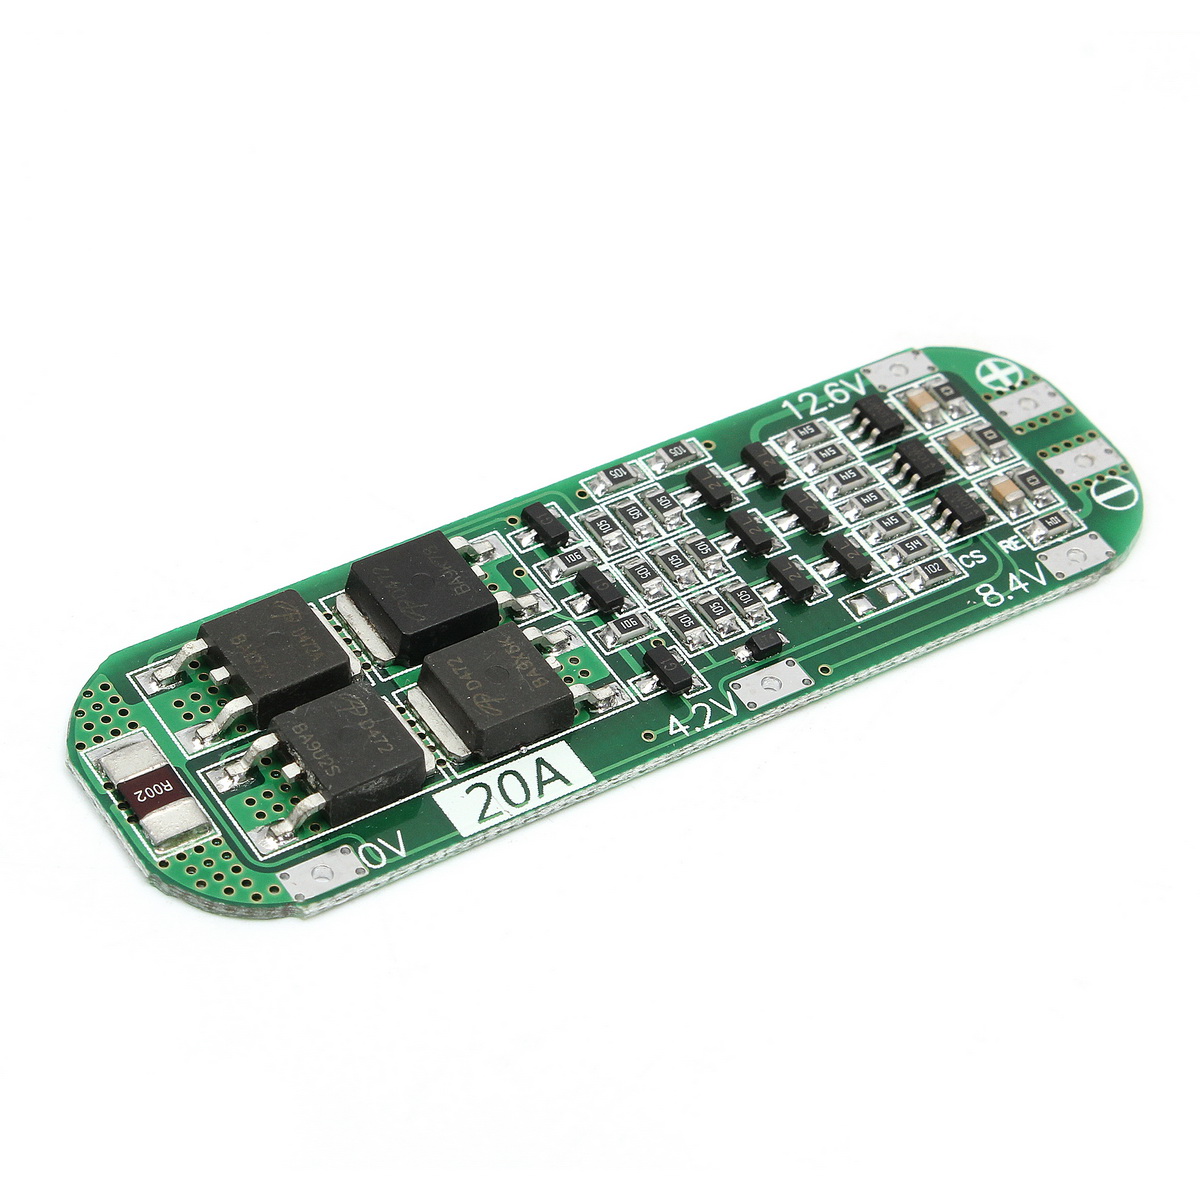 10pcs-3S-20A-Li-ion-Lithium-Battery-18650-Charger-PCB-BMS-Protection-Board-126V-Cell-1120989